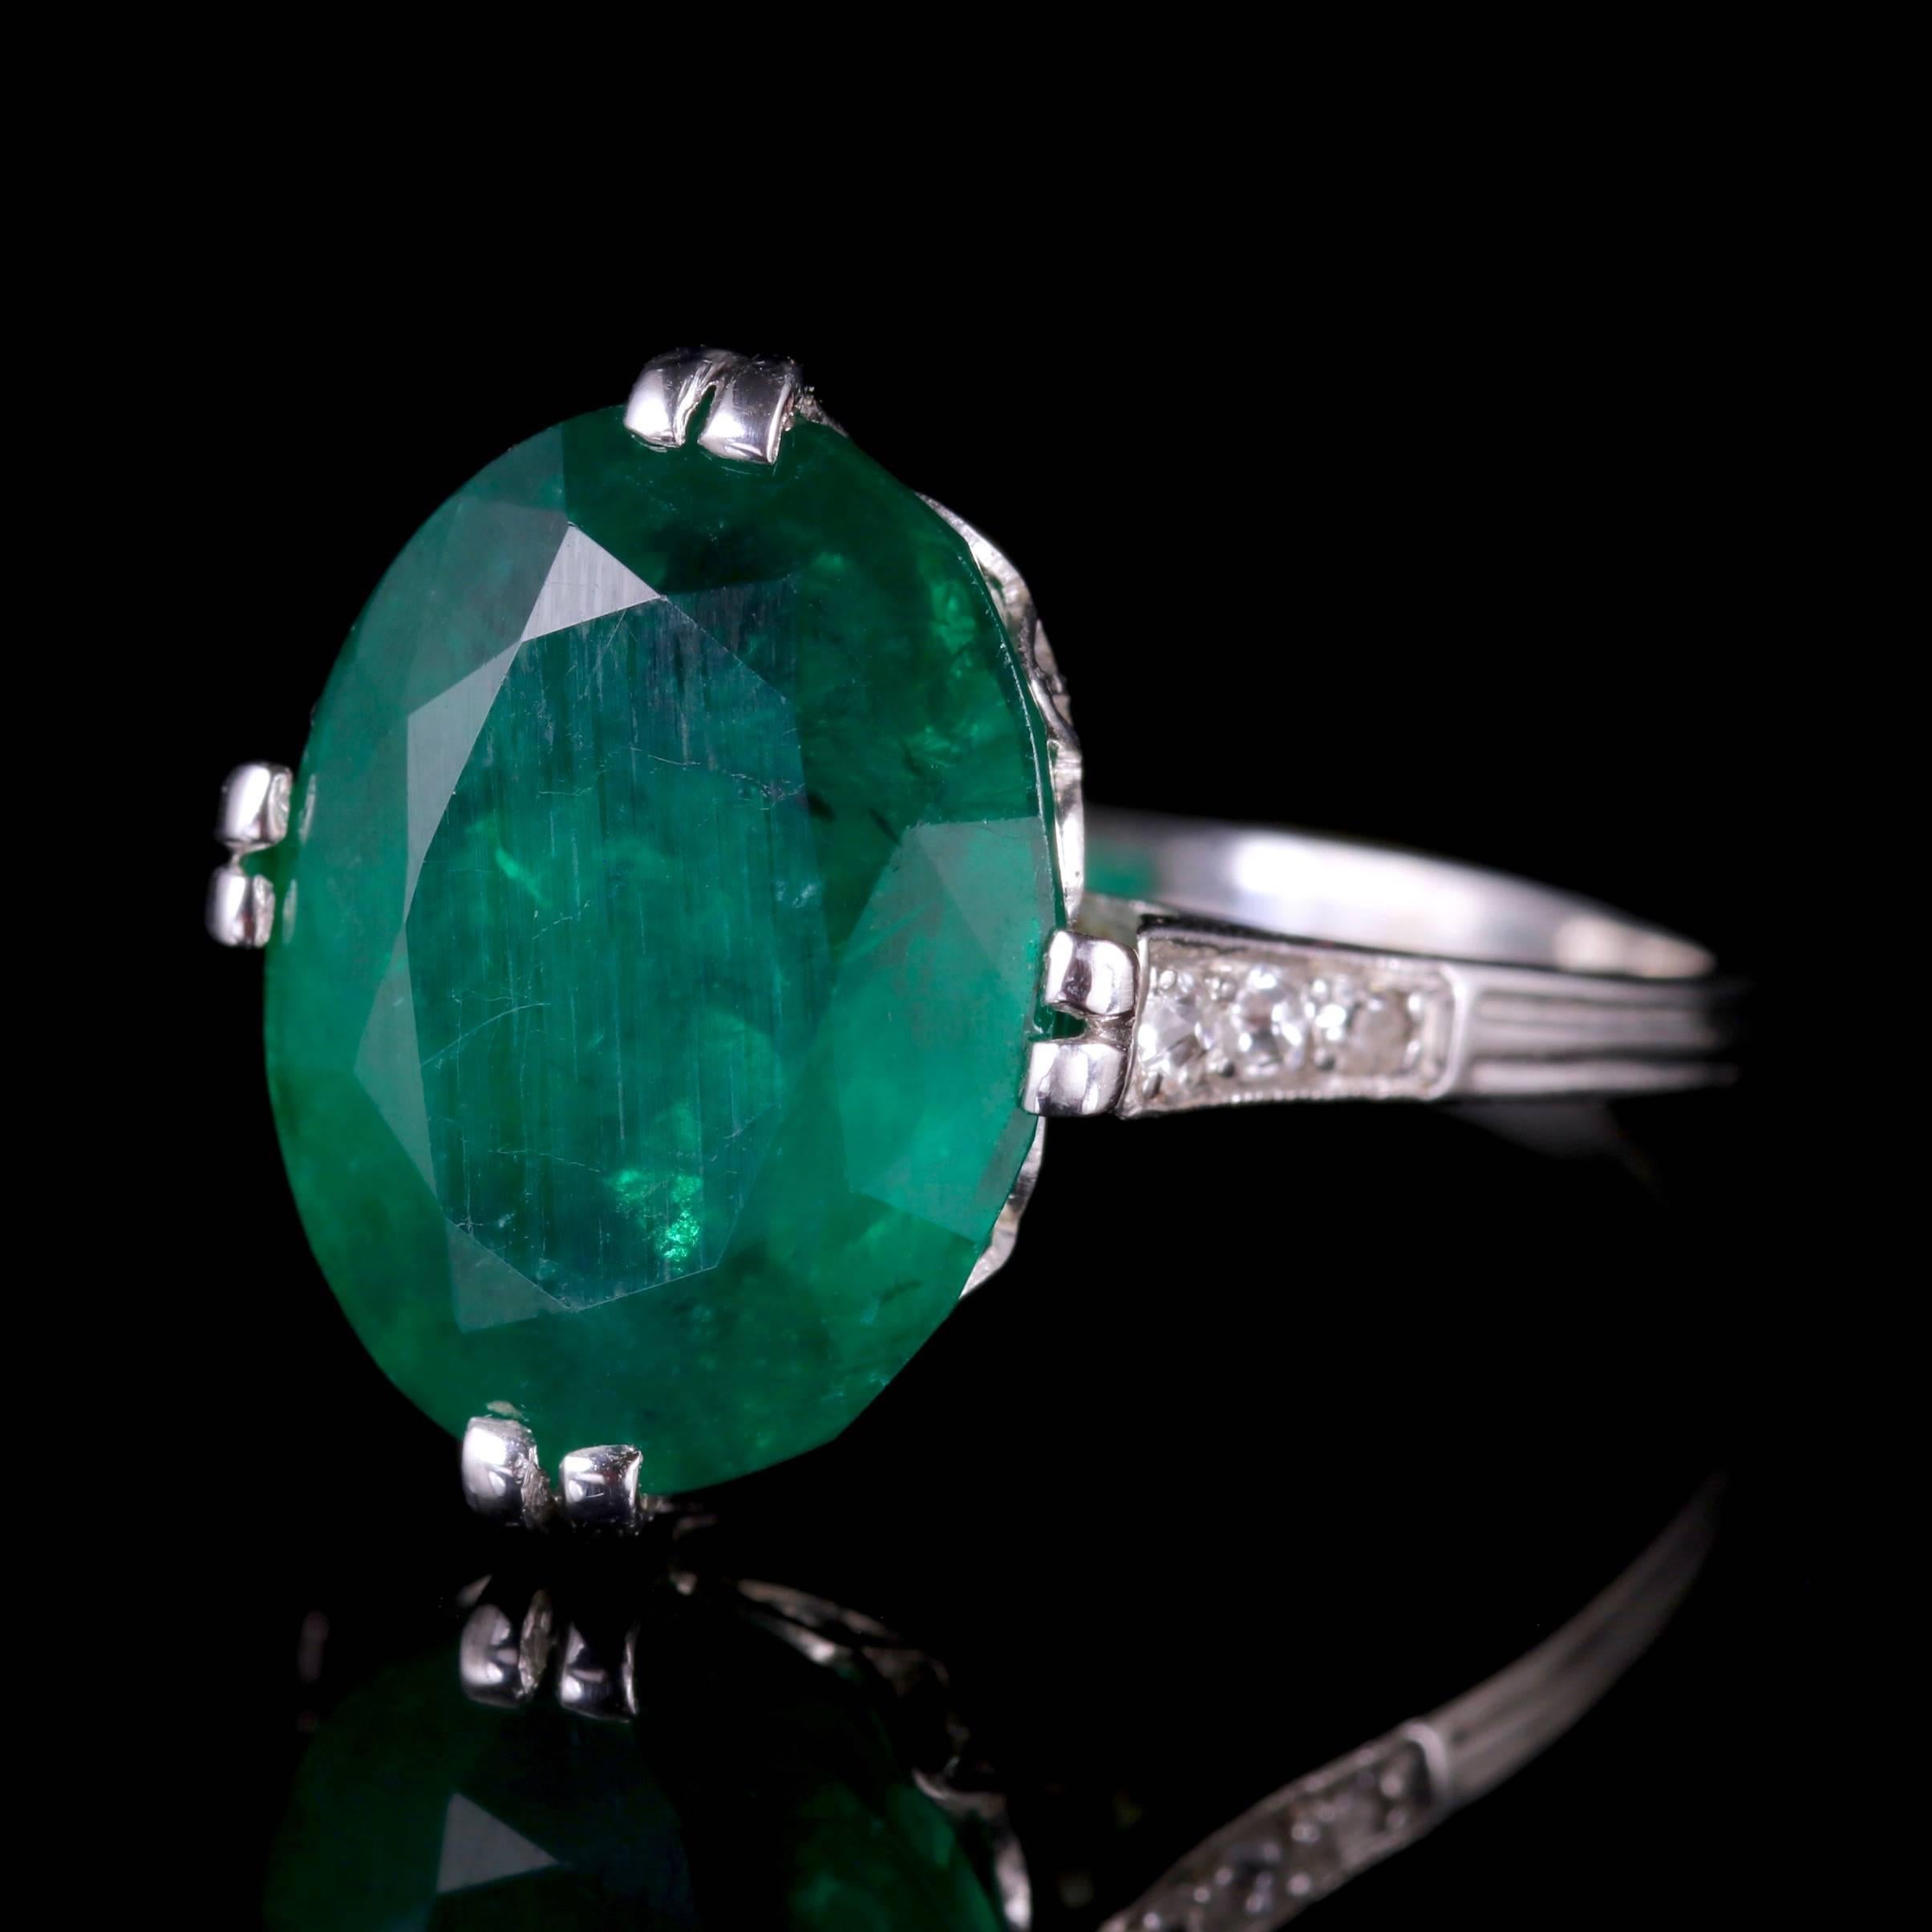 This magnificent antique Emerald and Diamond ring is Edwardian Circa 1910.

A fabulous natural green Emerald sits in the centre which is 6.13ct. Emeralds of this caliber are extremely sought after worldwide.

The Emerald is the sacred stone of the